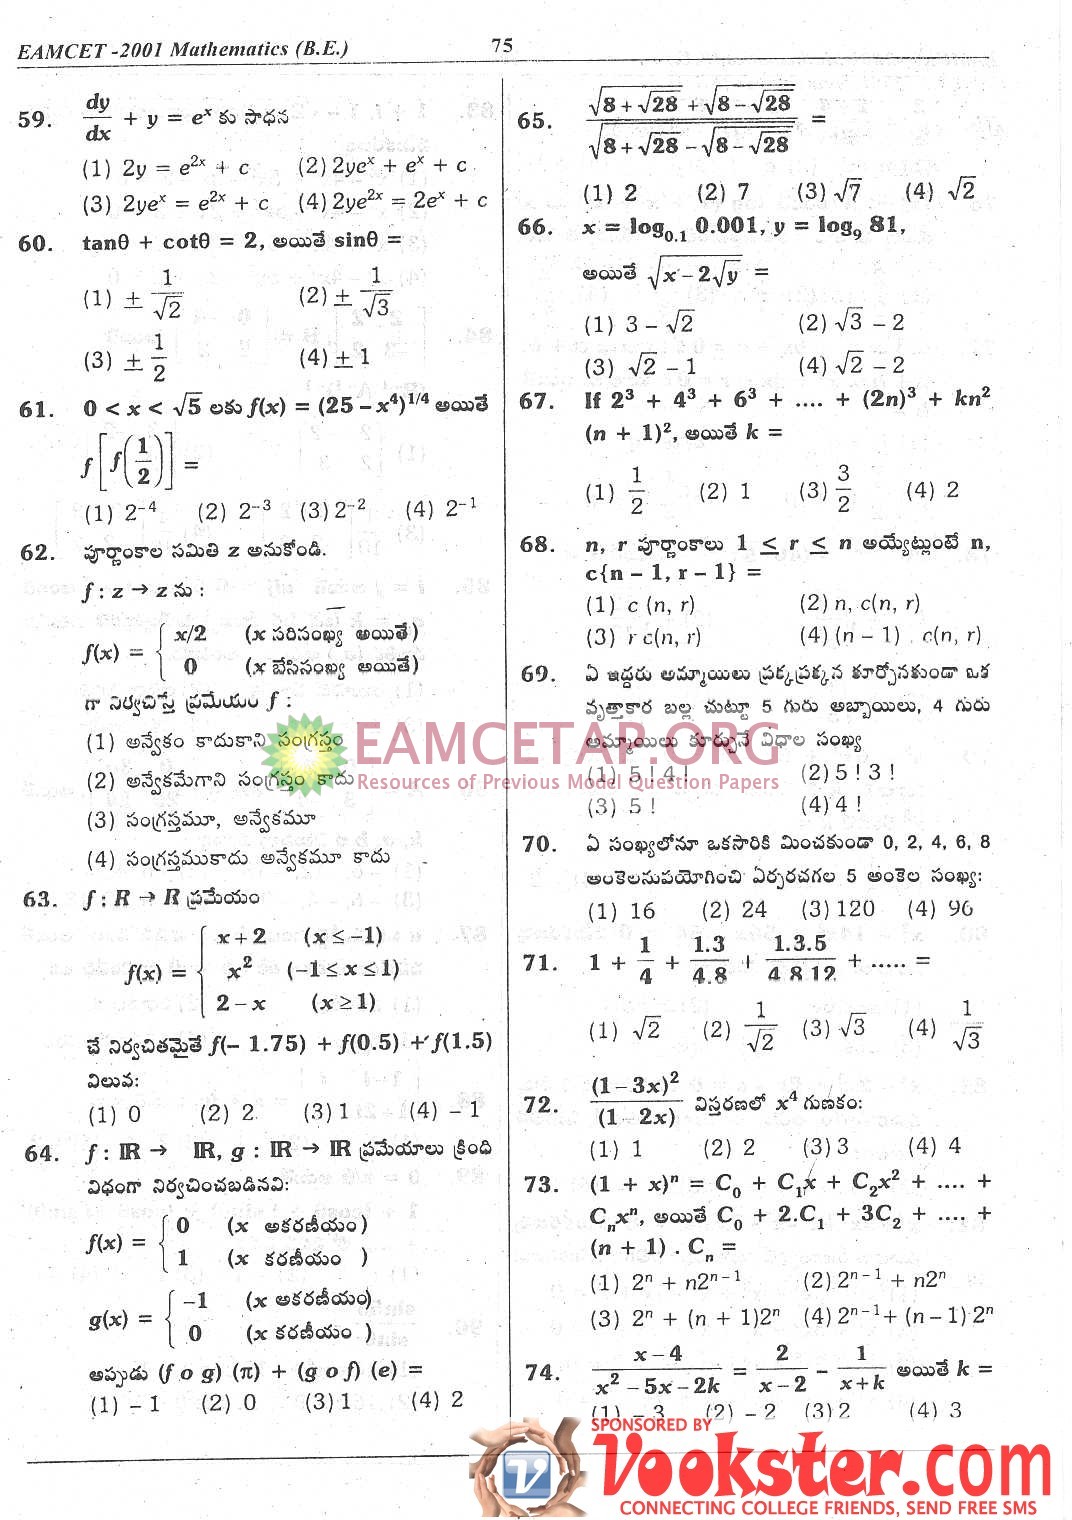 Eamcet Study Material Pdf